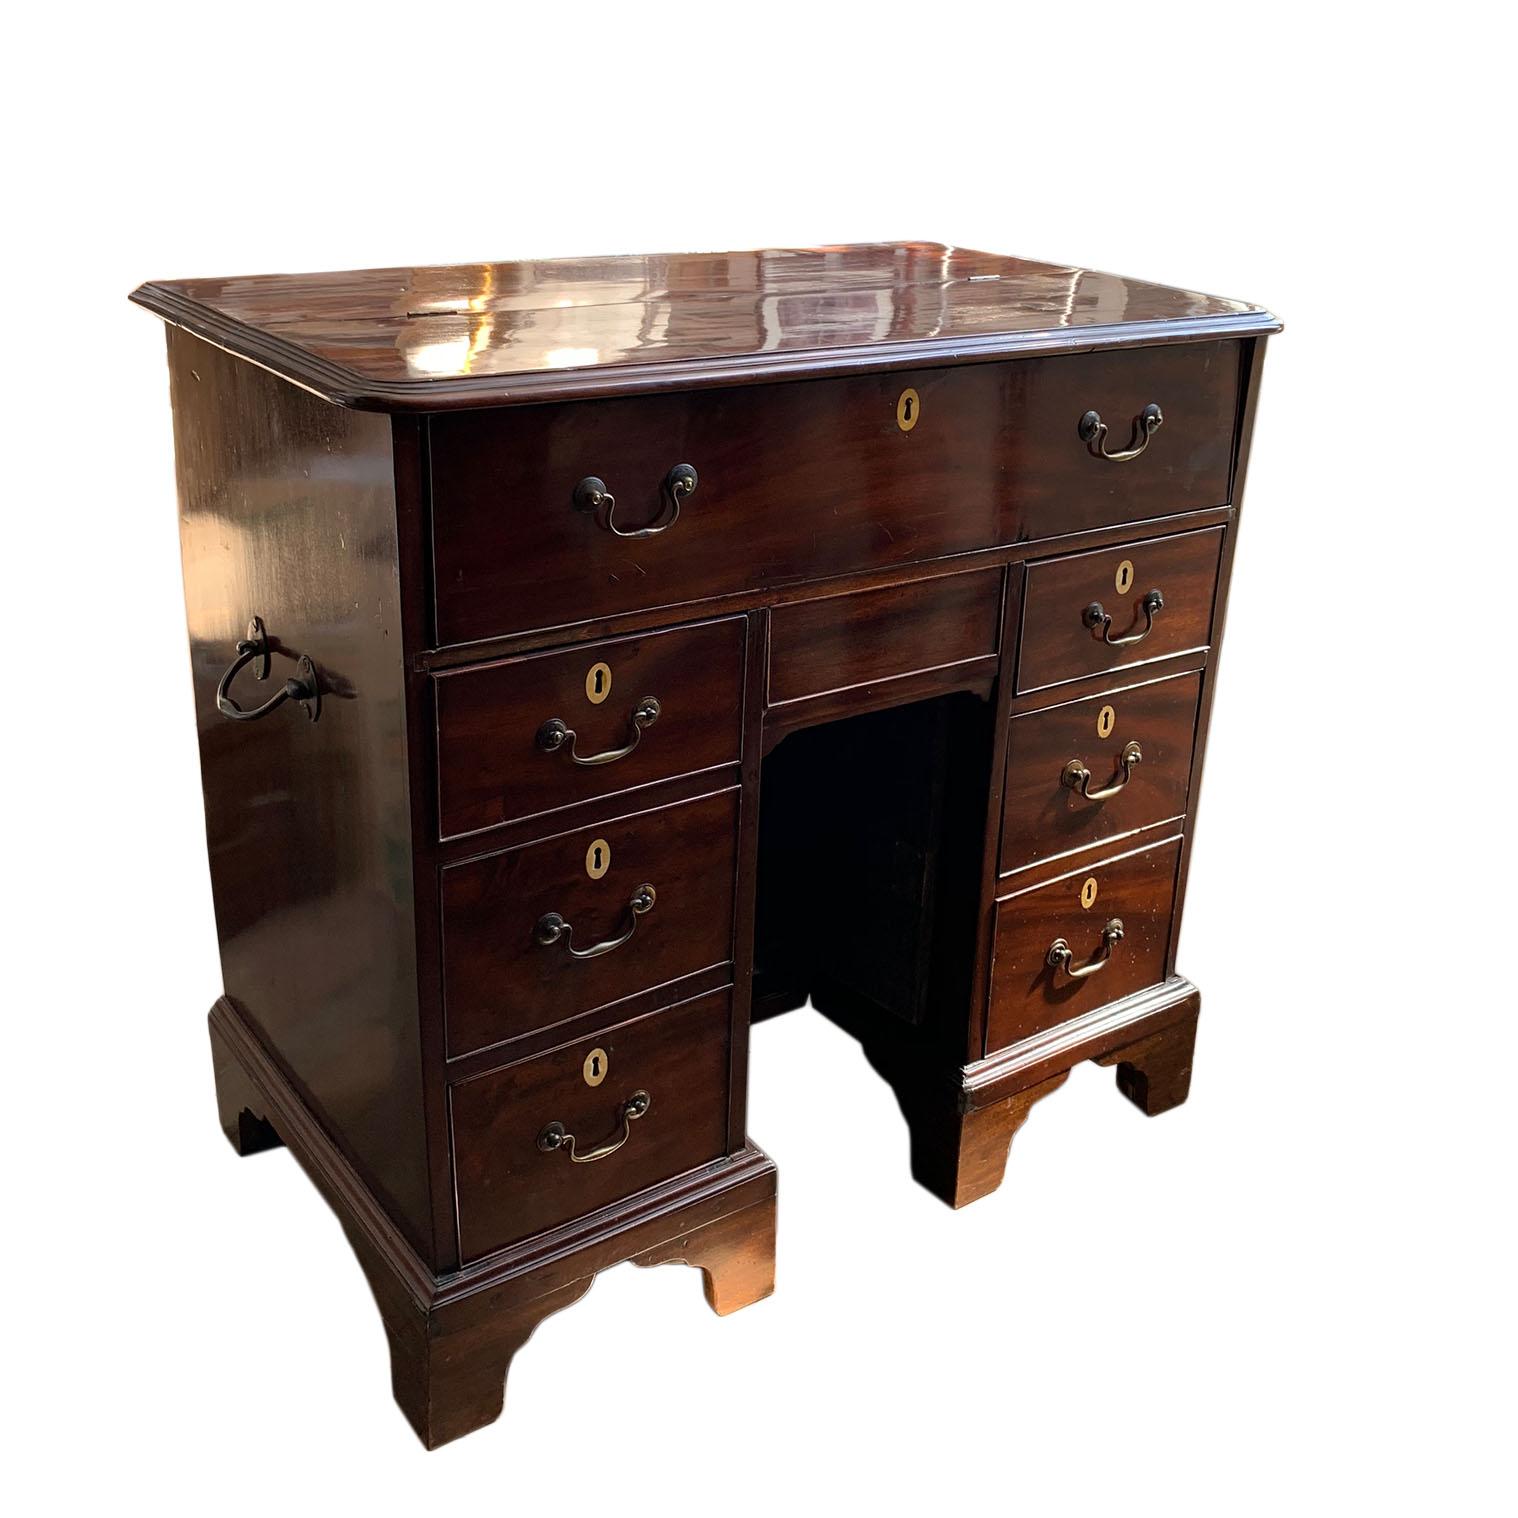 A George III period mahogany kneehole captains desk. Rare example of 18th century campaign furniture. Rich, dense Cuban mahogany inlaid with ivory escutcheons with period brass. Probably made on the Channel Islands. Britain, Circa 1760. Note,